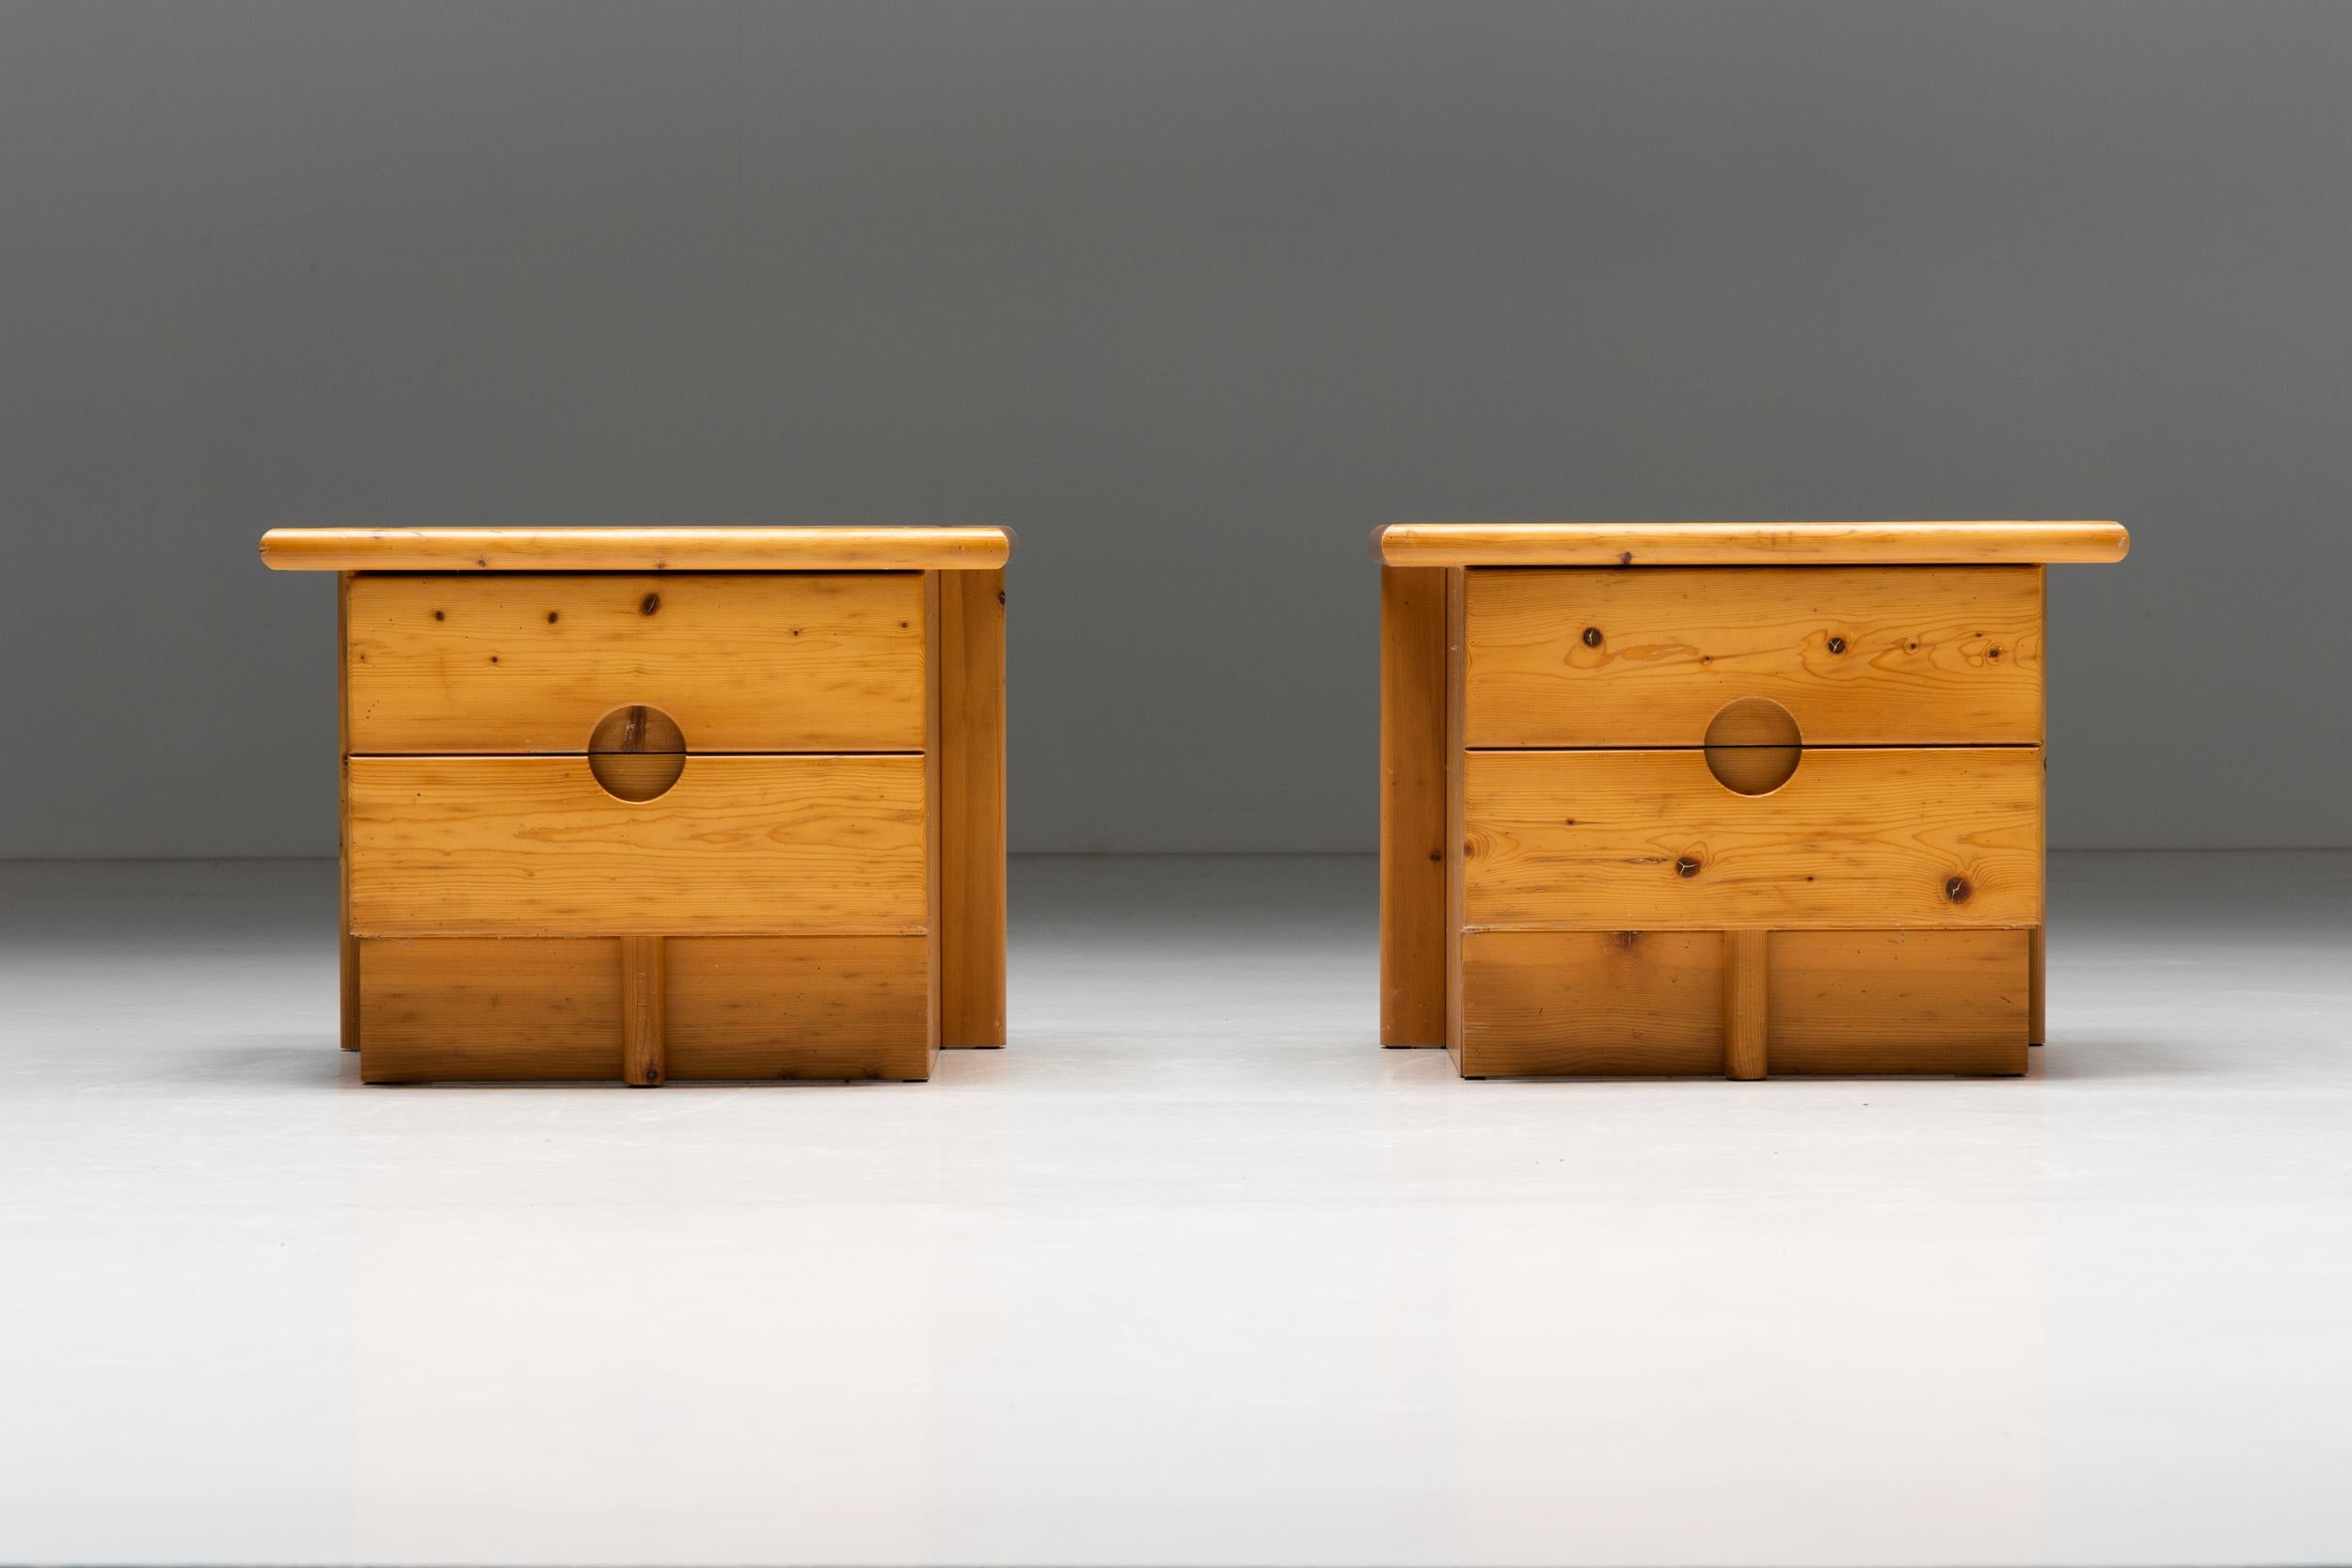 Pine Wood; Bench; Simplicity; 1970s; Brutalist; Charlotte Perriand; 1960s; Minimalist; France; 20th Century; Mid-Century Modern;

Solid pinewood bedside tables, inspired by the iconic Charlotte Perriand. Made in France in the 1960s, these tables